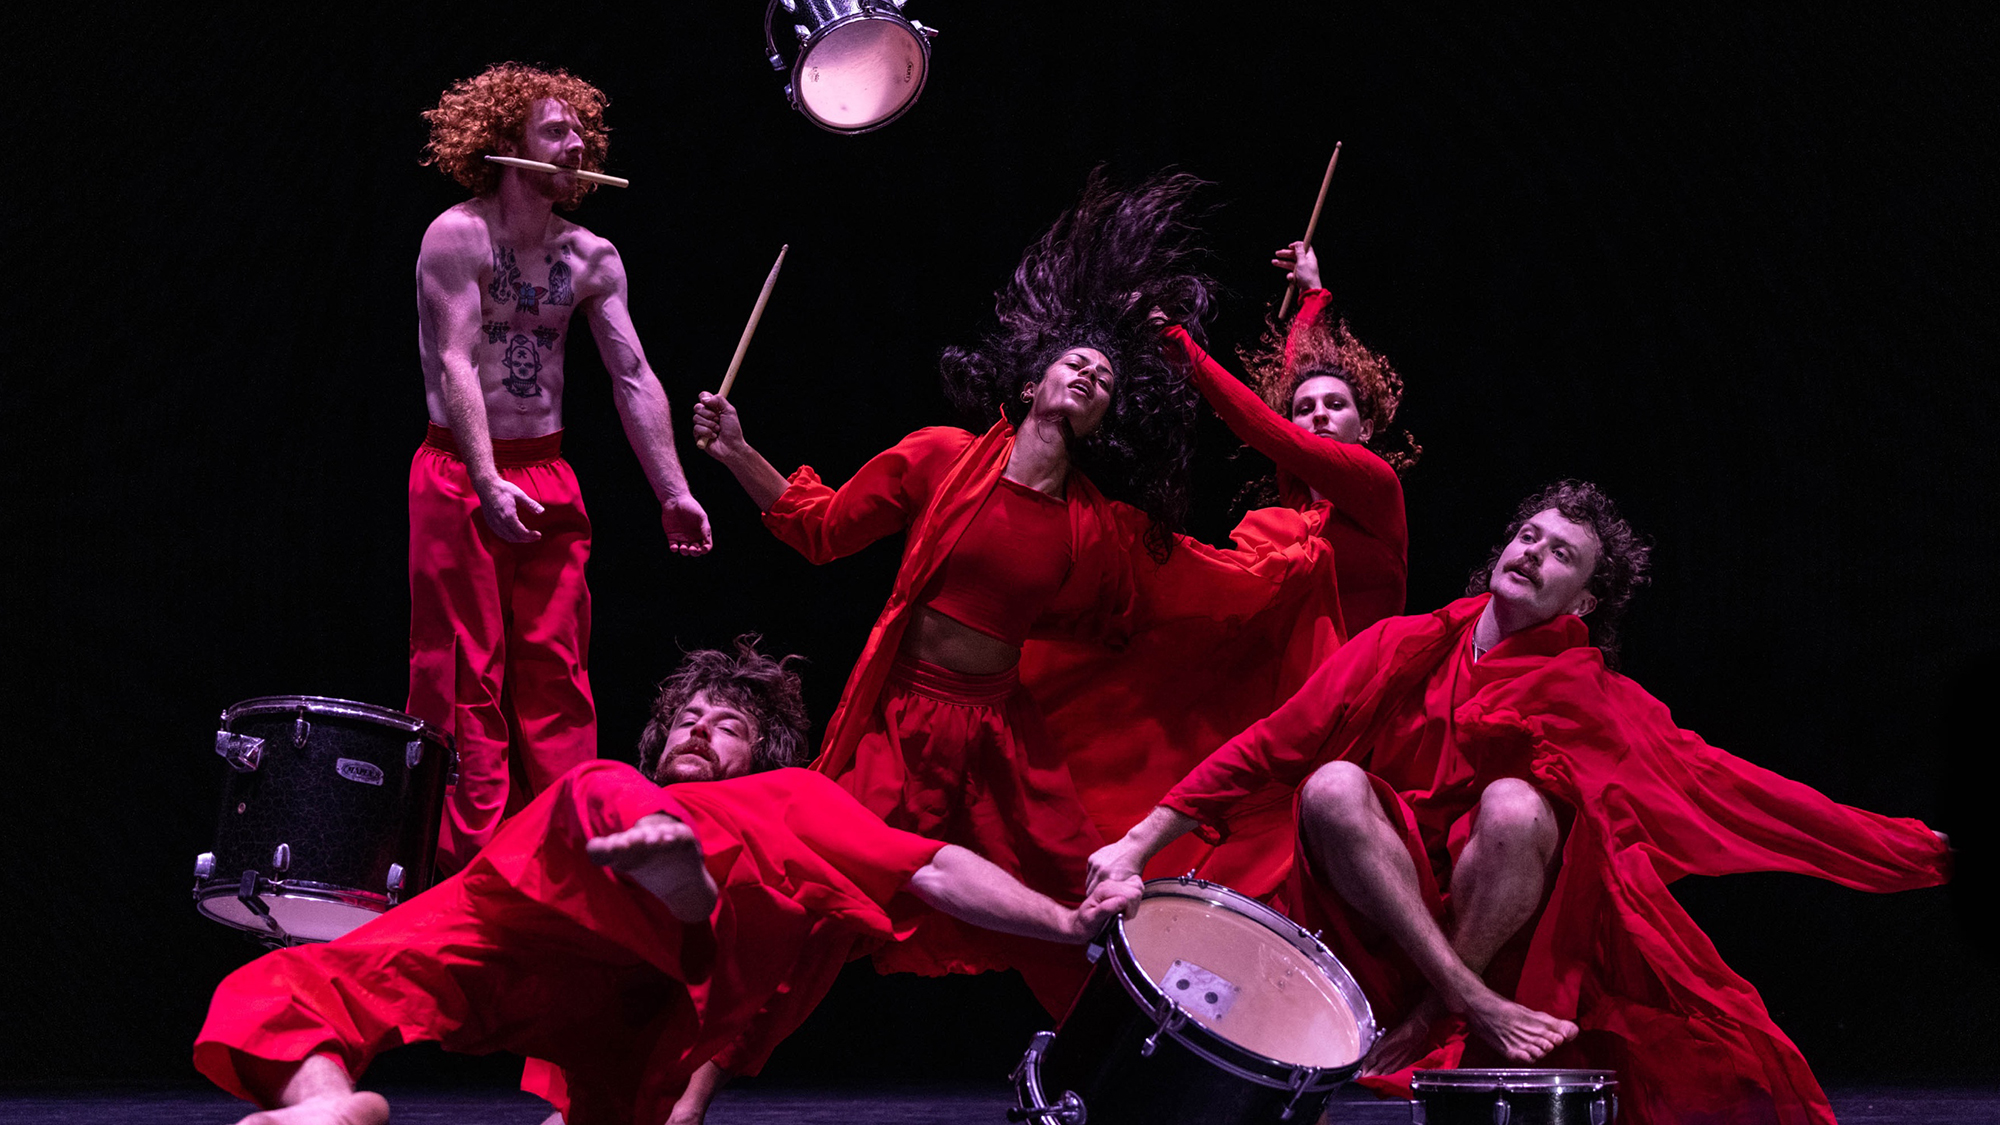 Dancers with drums, dressed in red.